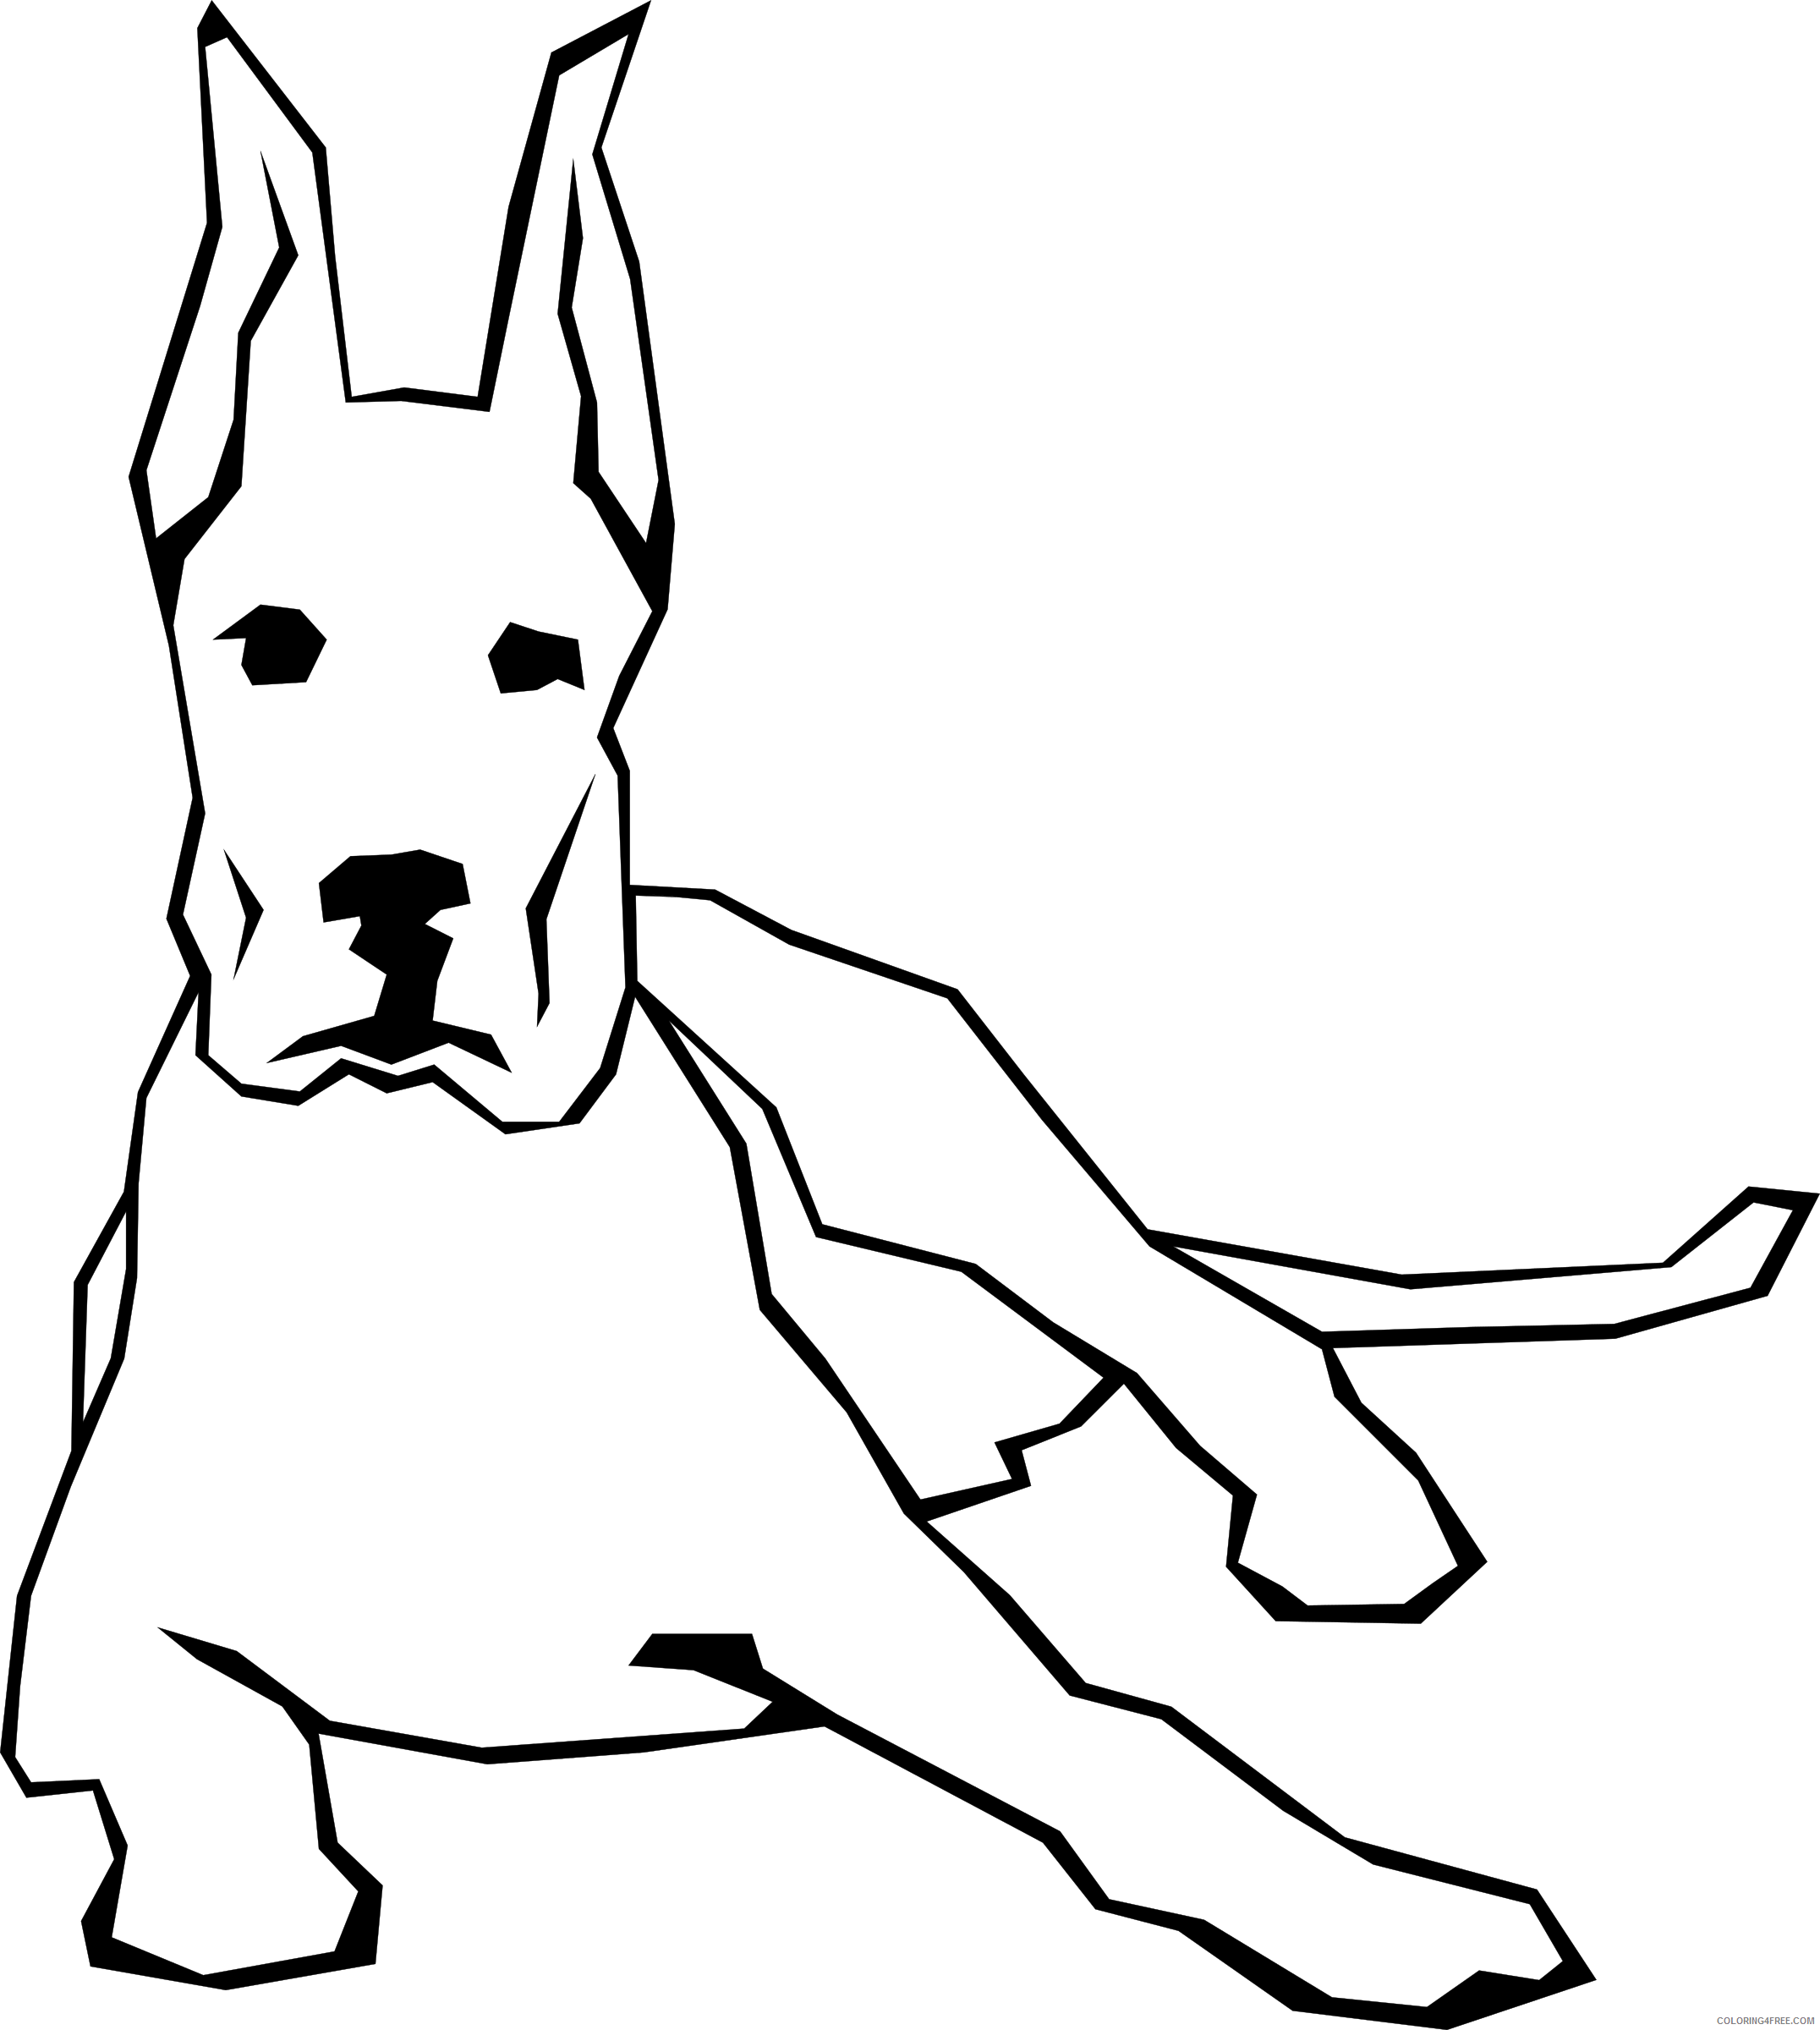 Black and White Dog Coloring Pages gerald g dog simple drawing Printable Coloring4free